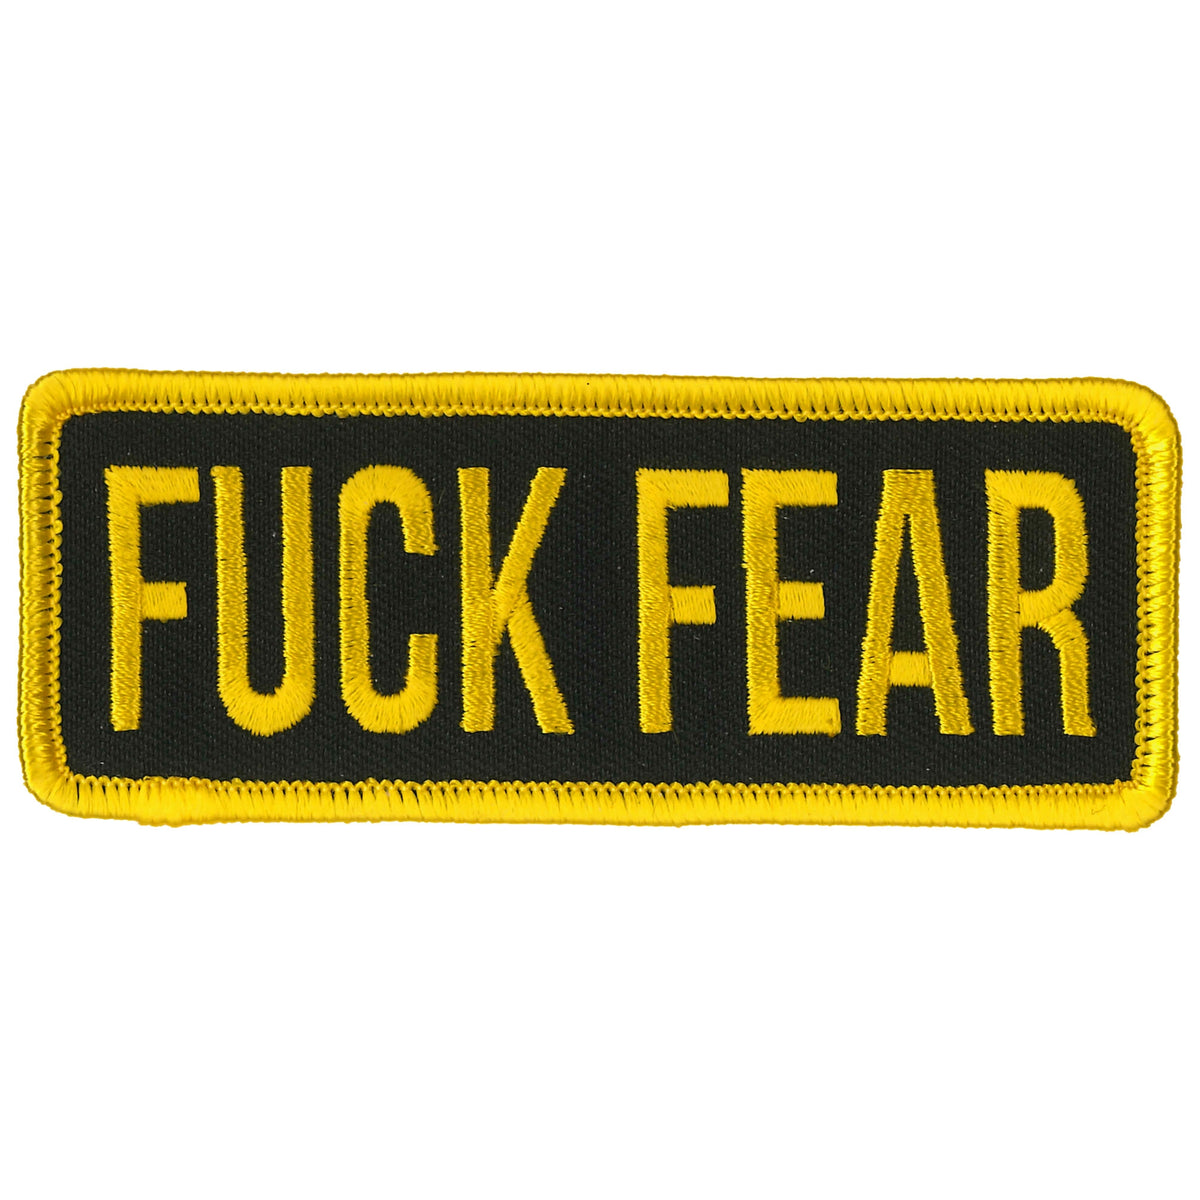 Hot Leathers PPL9856 Fuck Fear 4"x 2" Patch